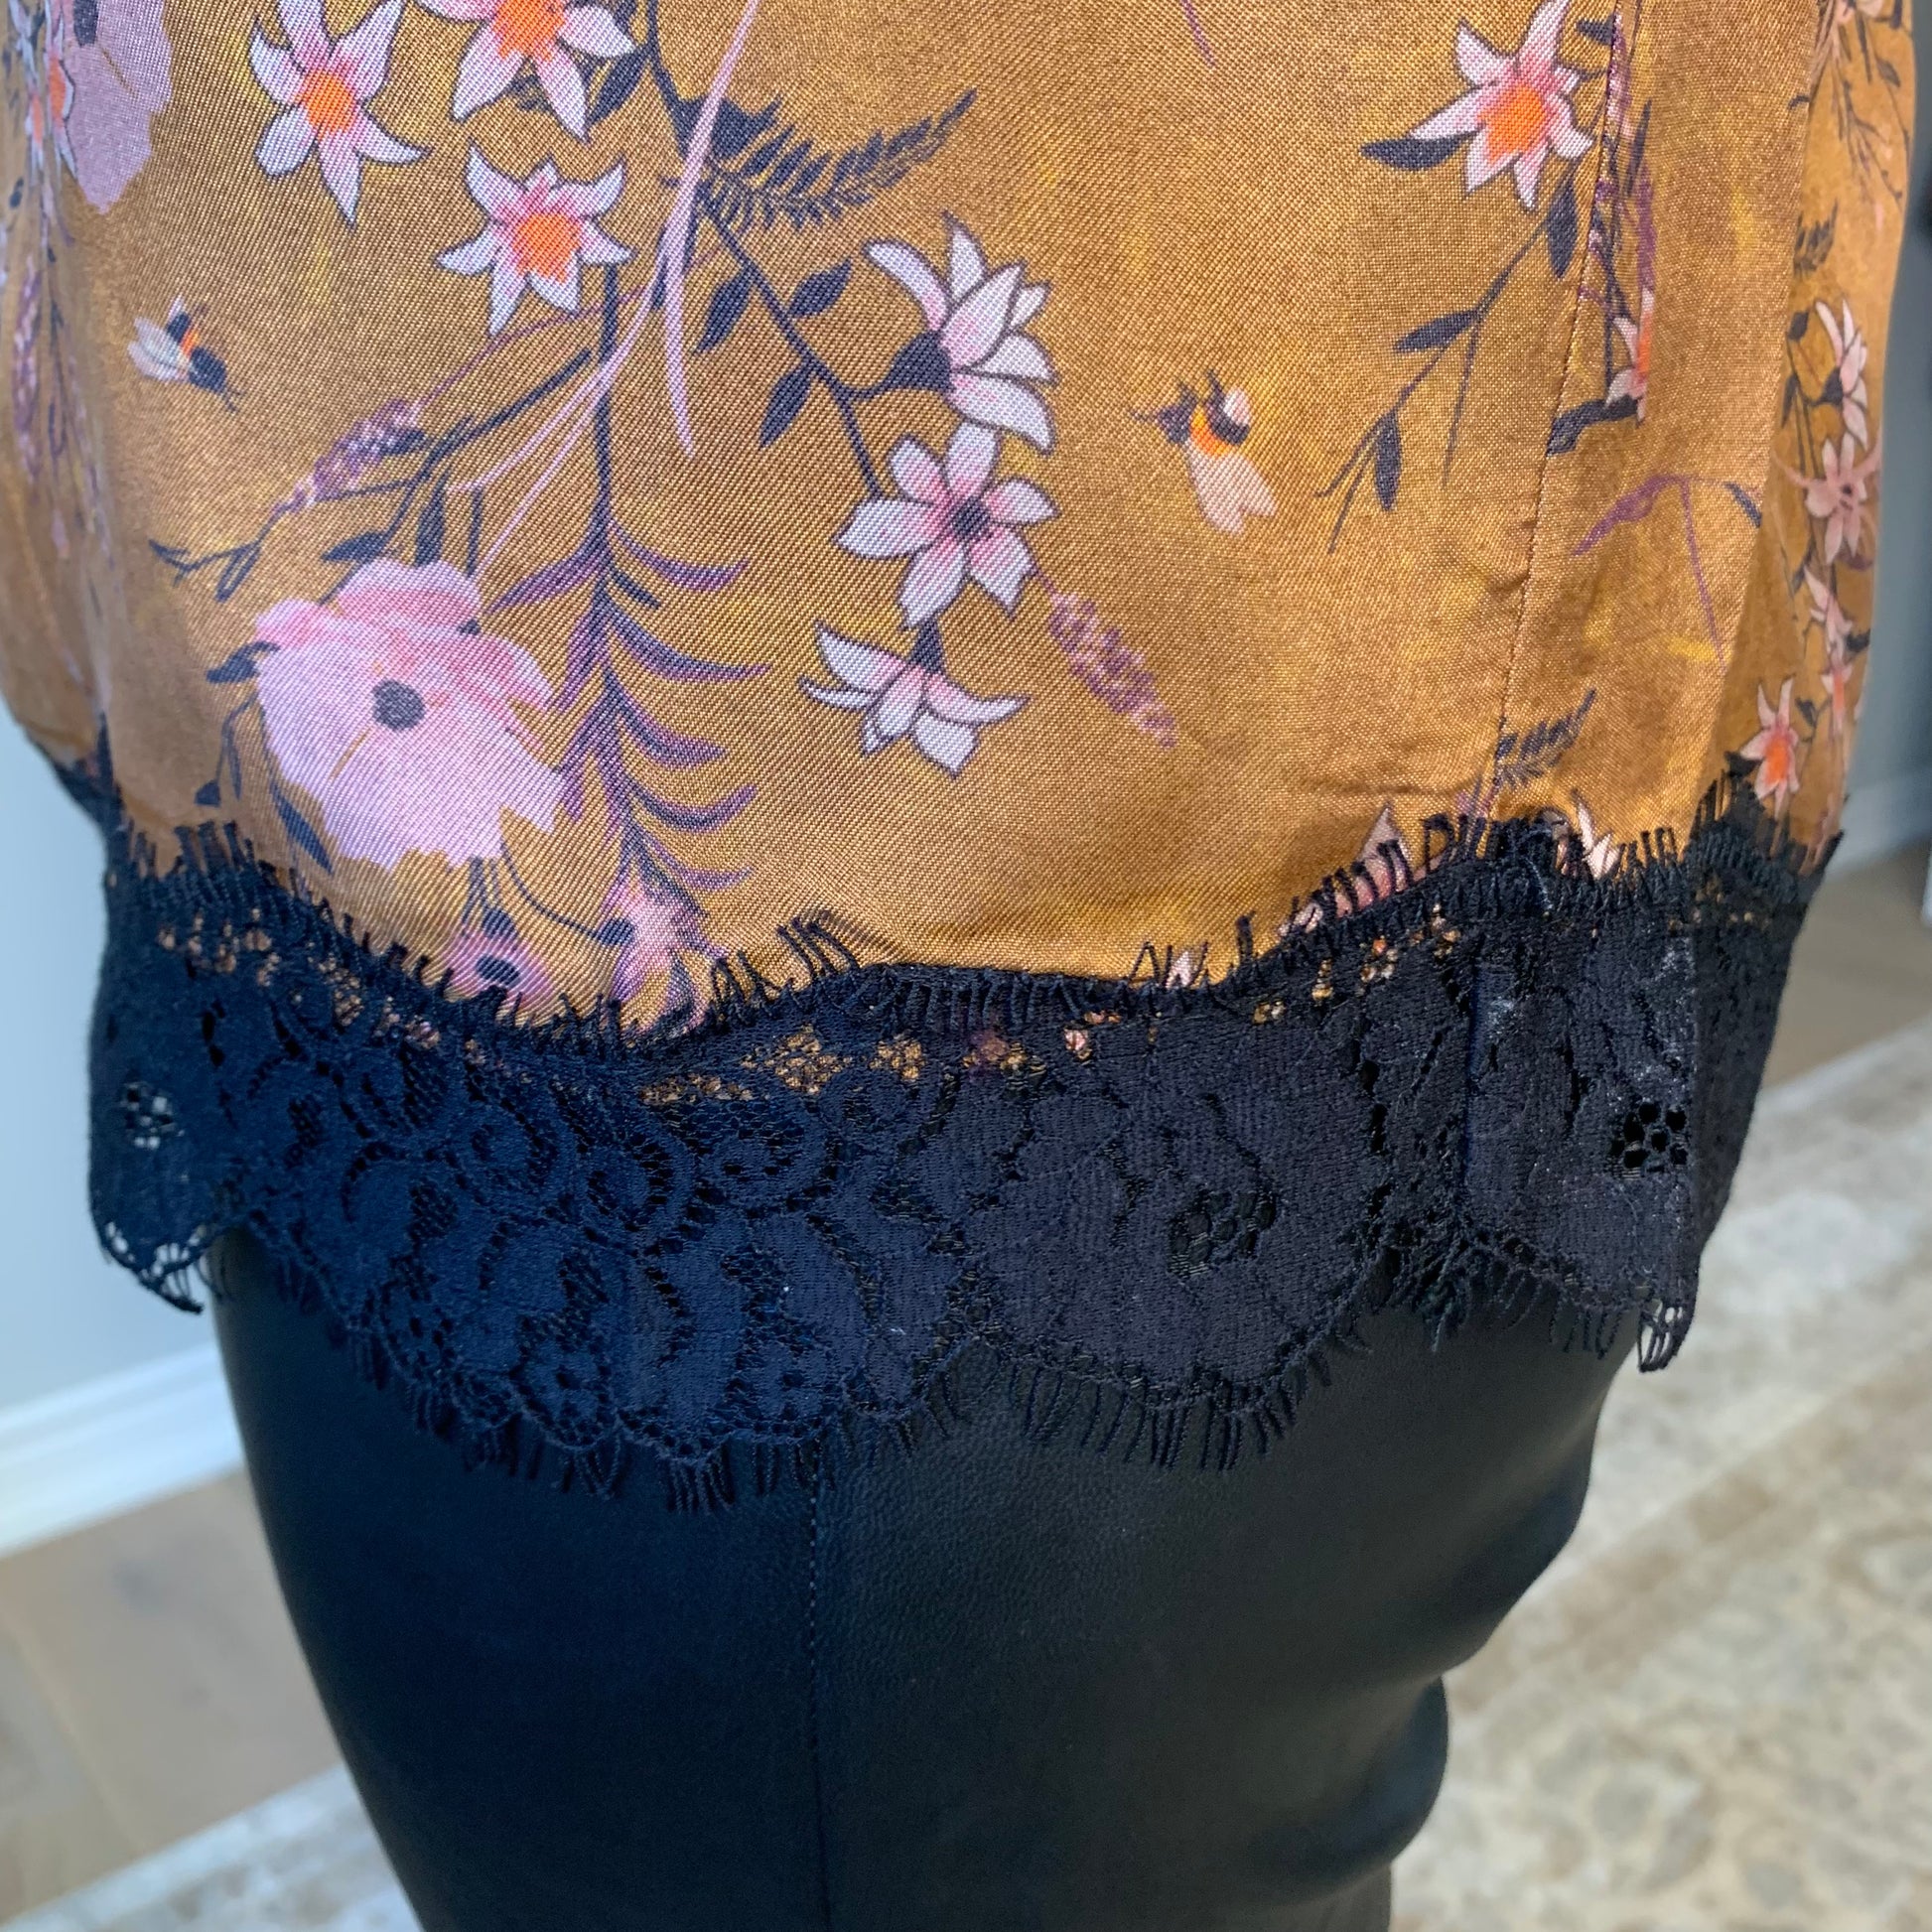 This Floral Camisole by the Korner presents a straight cut with black lace trimming around the hemline. An eye-catching, soft floral pattern in purple and pinks is set against a deep, velvety cinnamon hue, providing a luxuriously matte silk like finish. lemon cyprus boutique